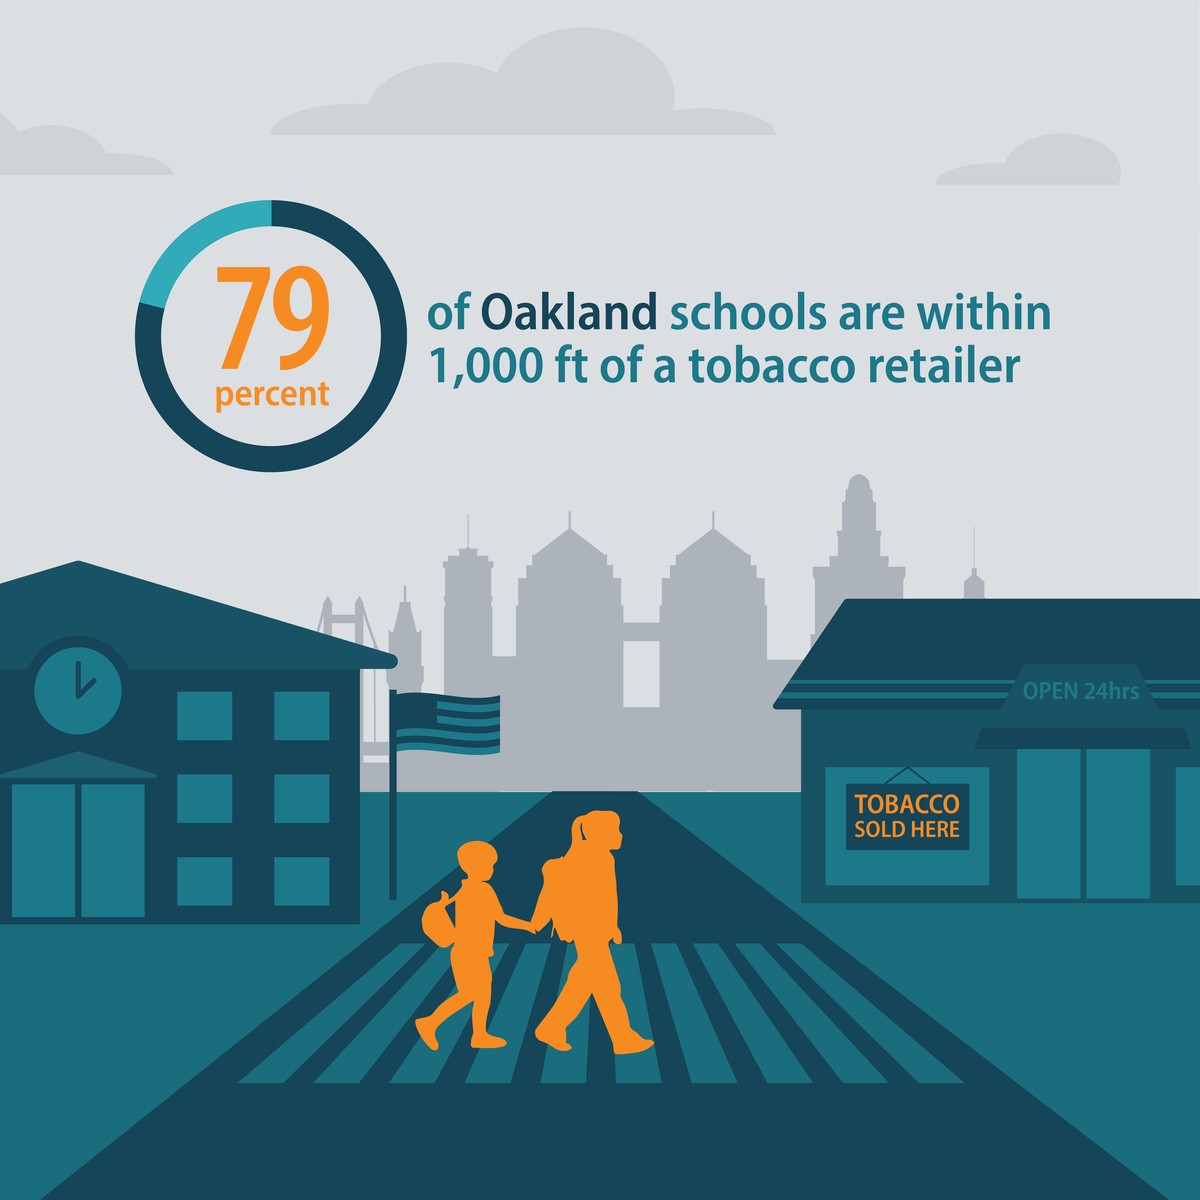 79 percent of Oakland schools are within 1,000 feet of a tobacco retailer